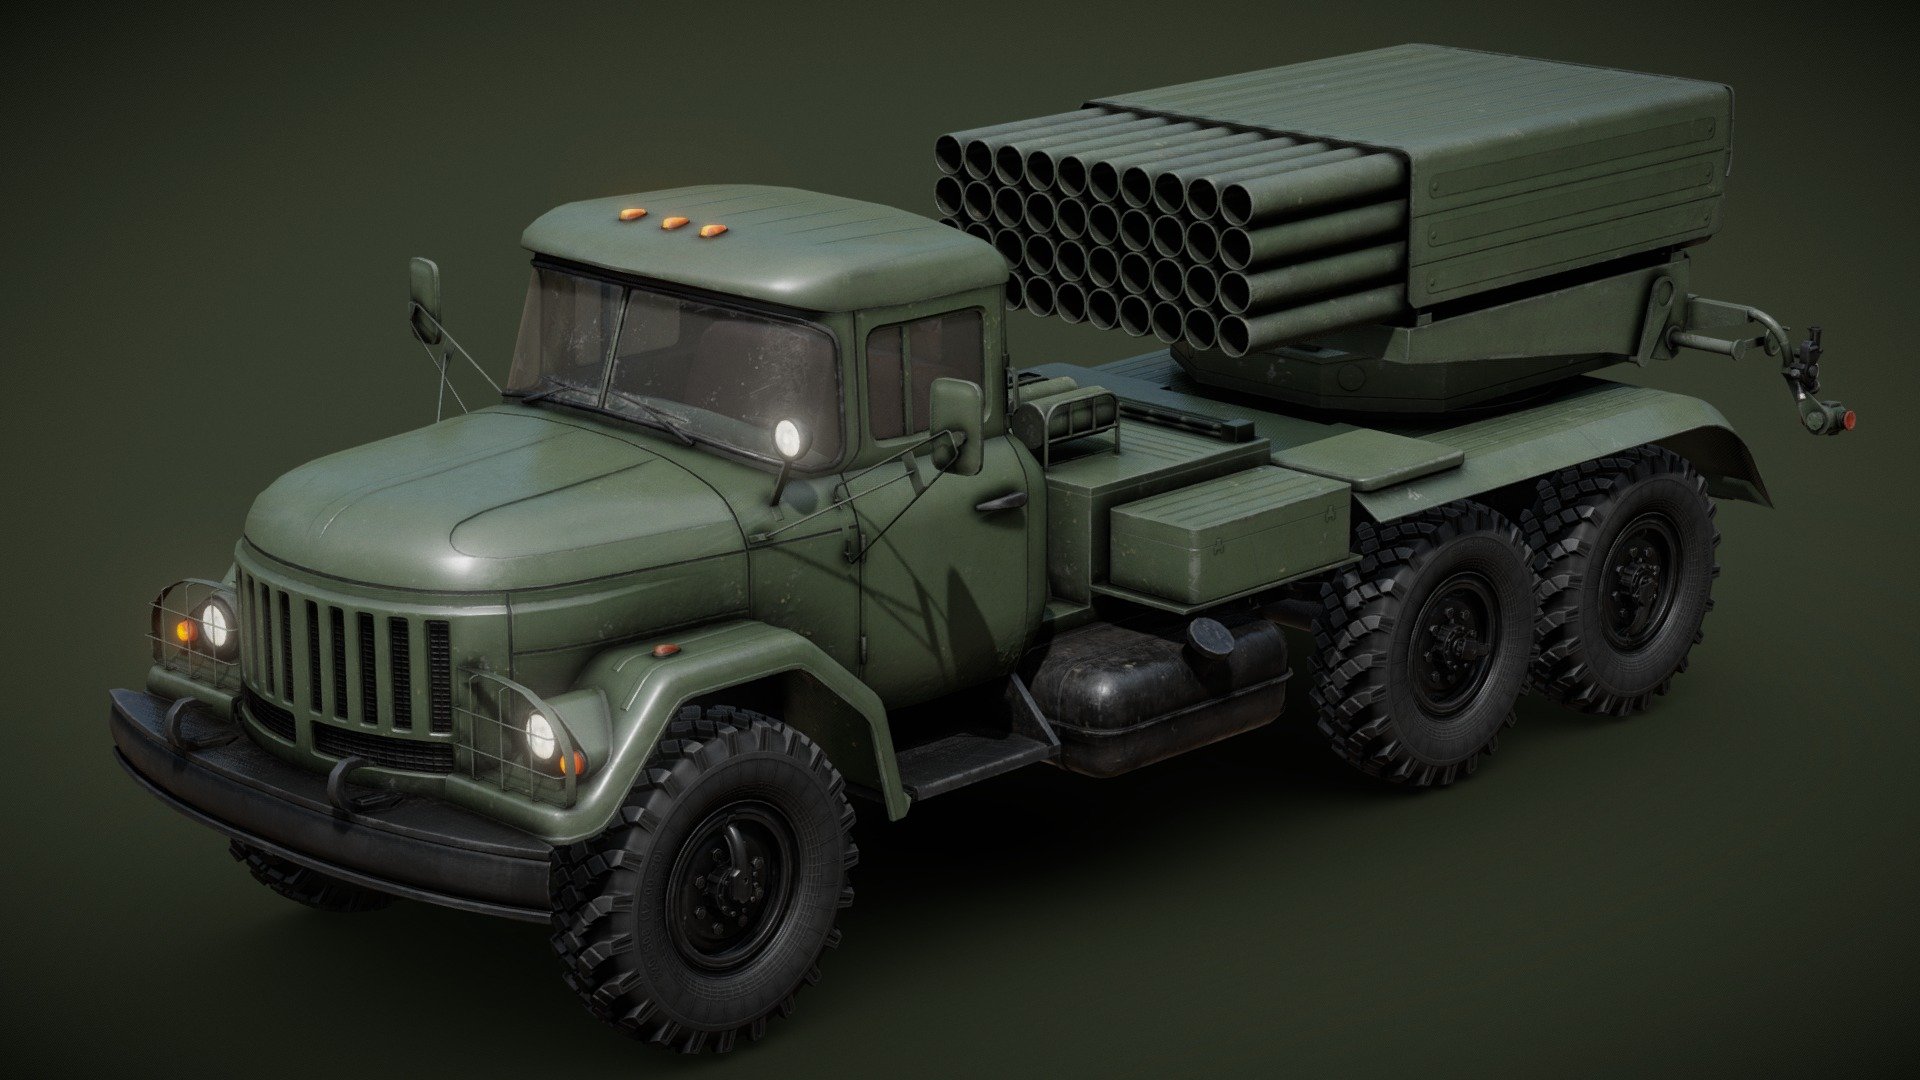 Separate materials for: cabin, interior, glass, frame, launcher base, top launcher part and wheels.
Wheels and rocket launcher parts are separate objects.
1k textures with alpha for the glass, 2k for the wheels and 4k for all the other materials.



The BM-21 &ldquo;Grad